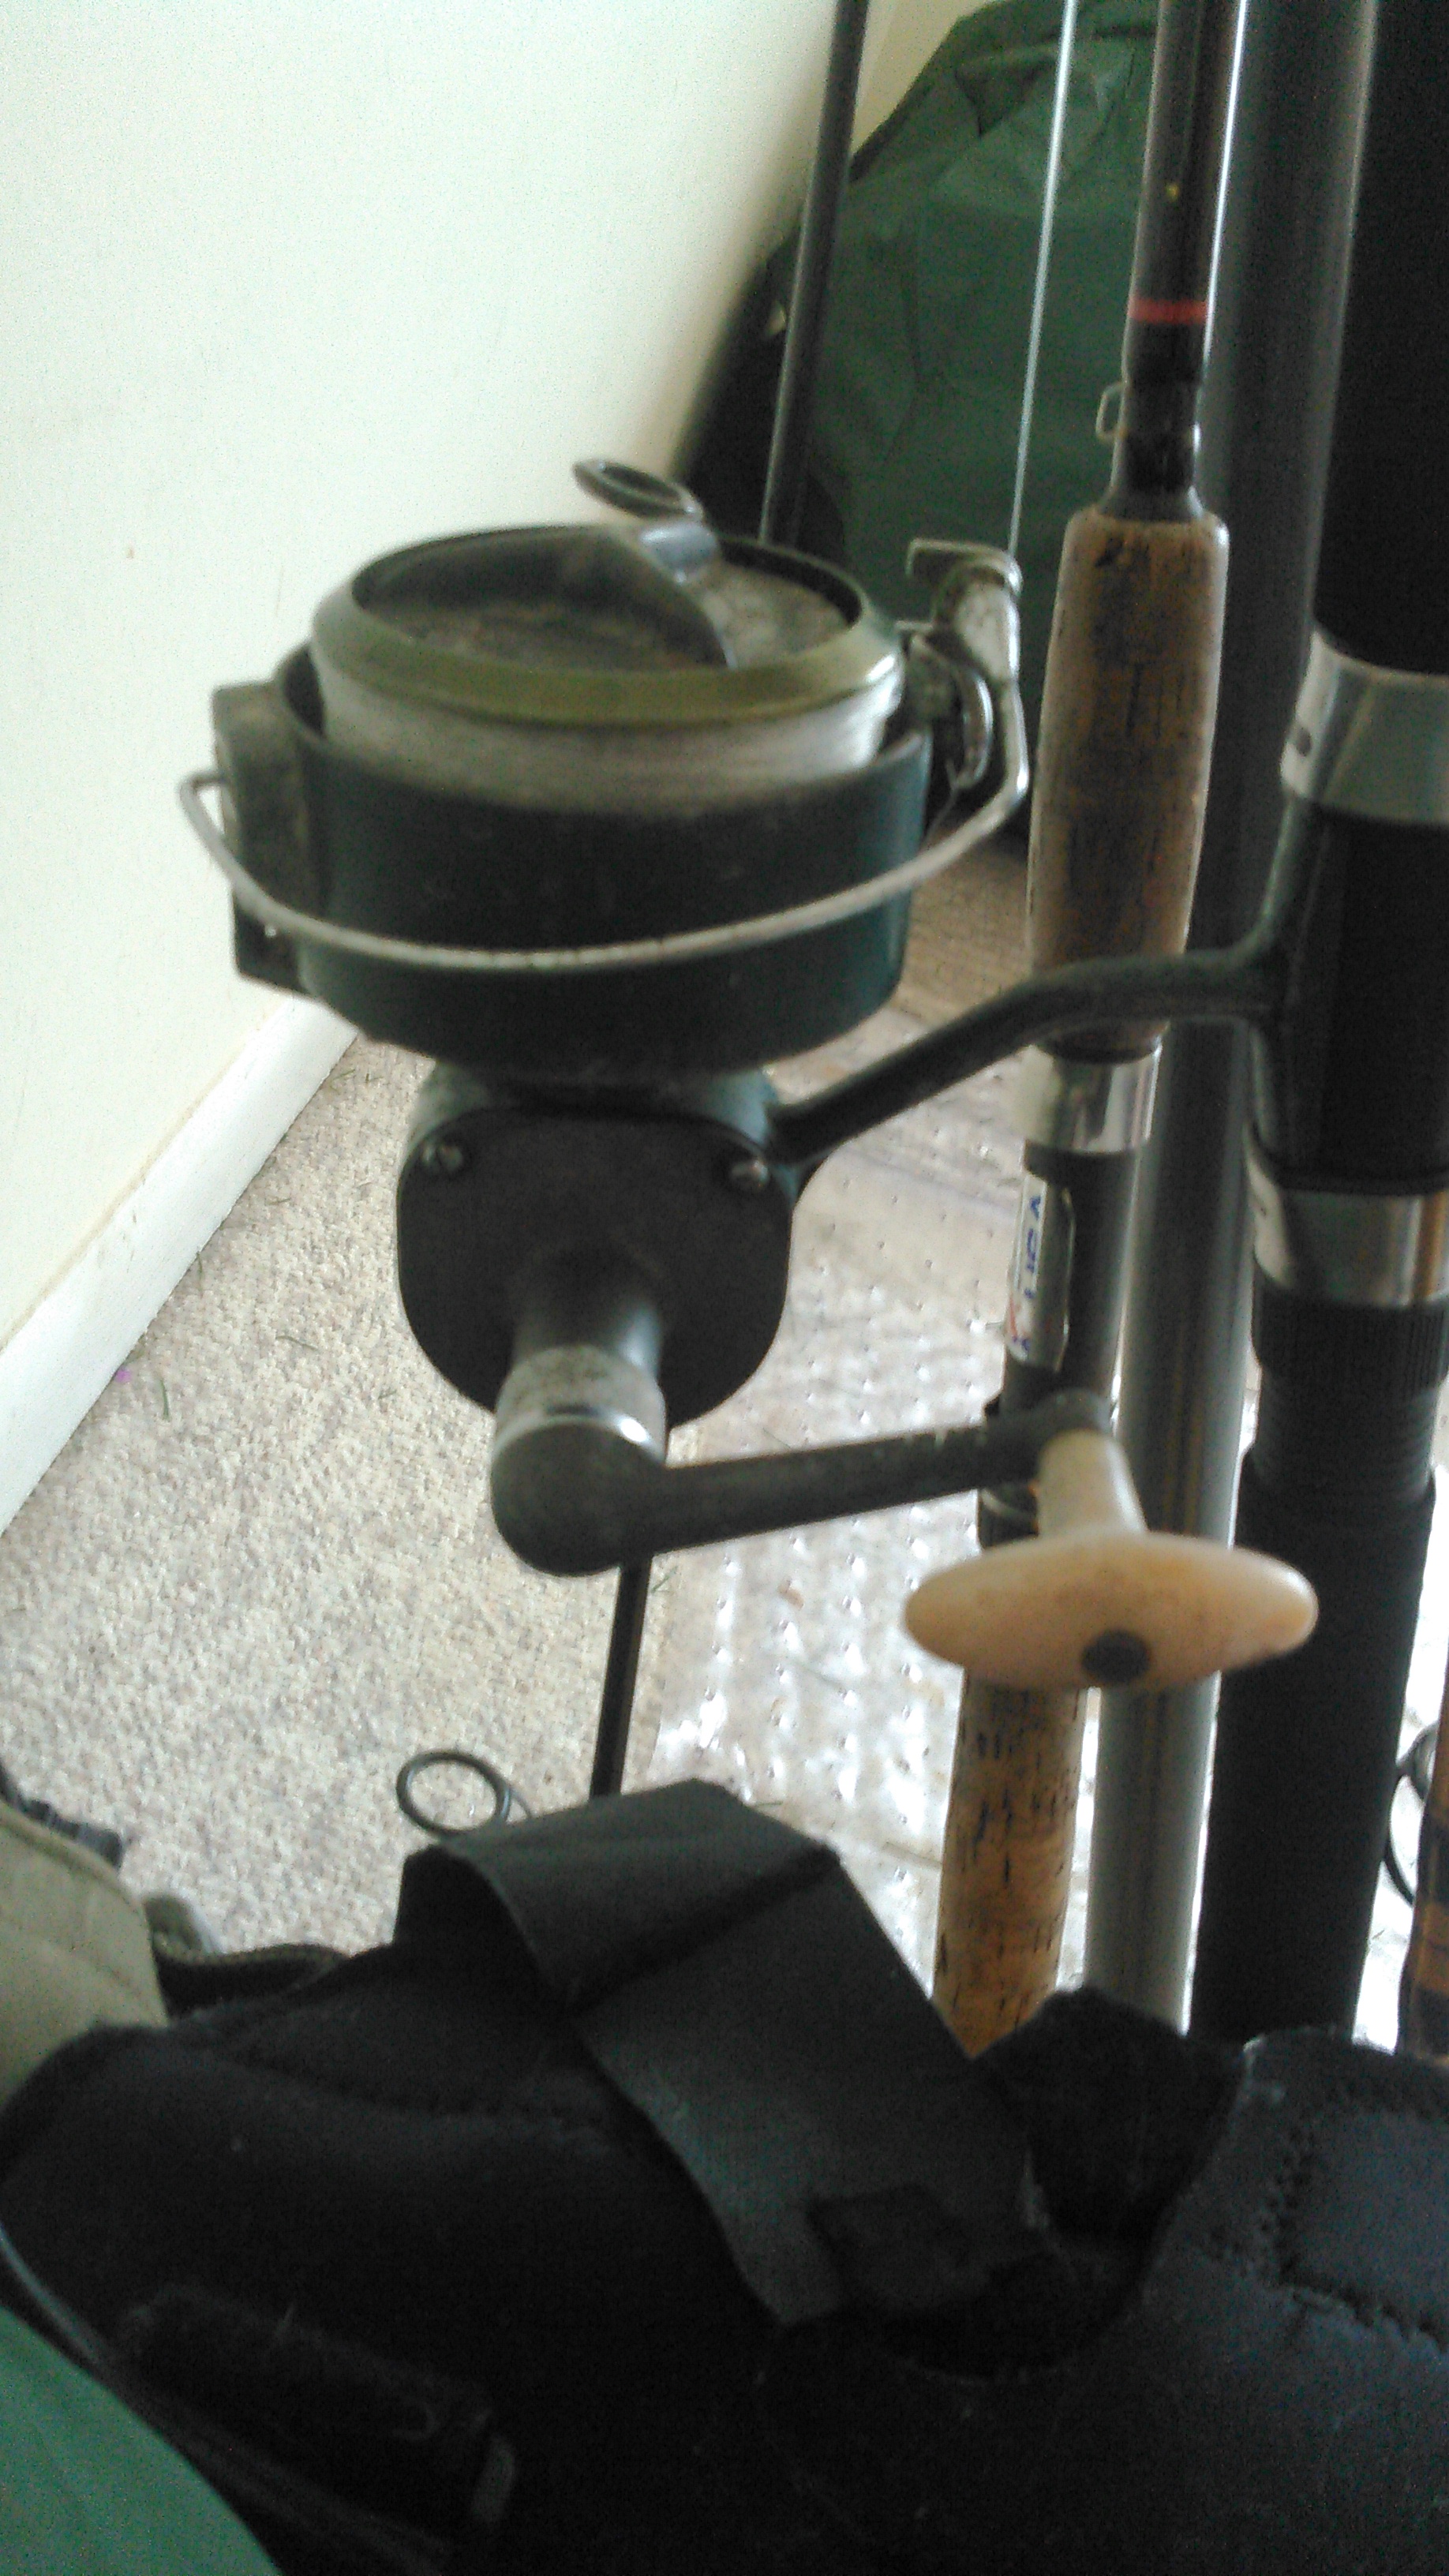 Vintage Zebco Spinator 870 Spinning Reel, Seems To Be In Good